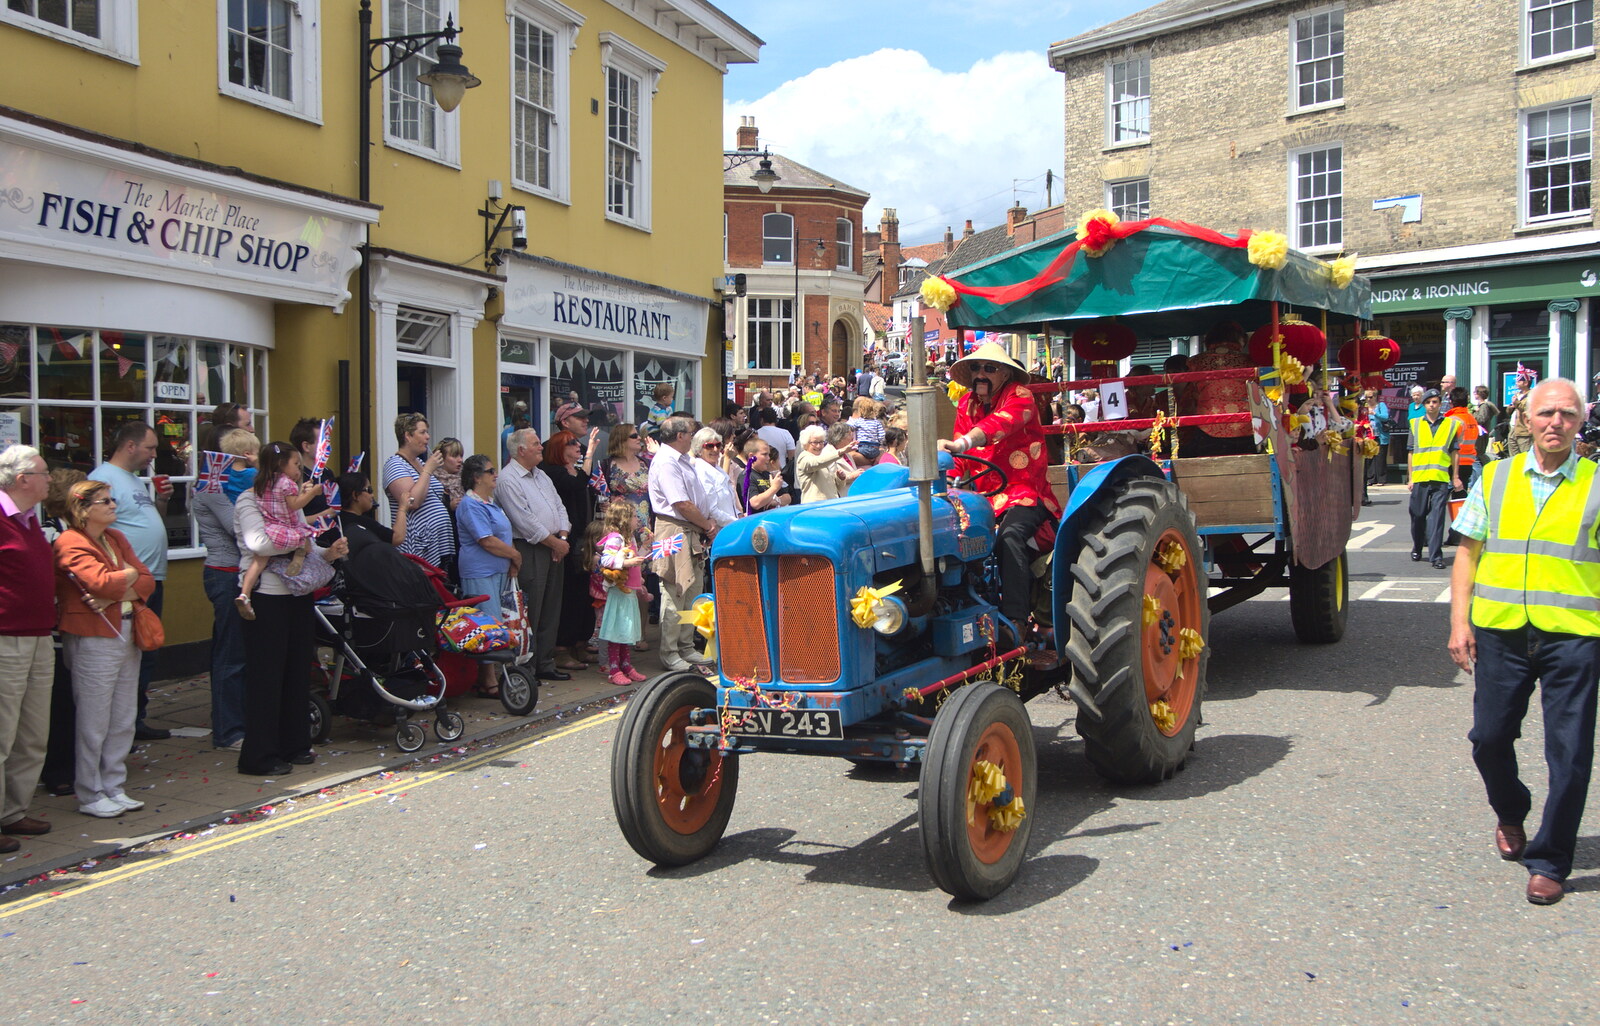 Another vintage tractor from Morris Dancing and a Carnival Procession, Diss, Norfolk - 17th June 2012